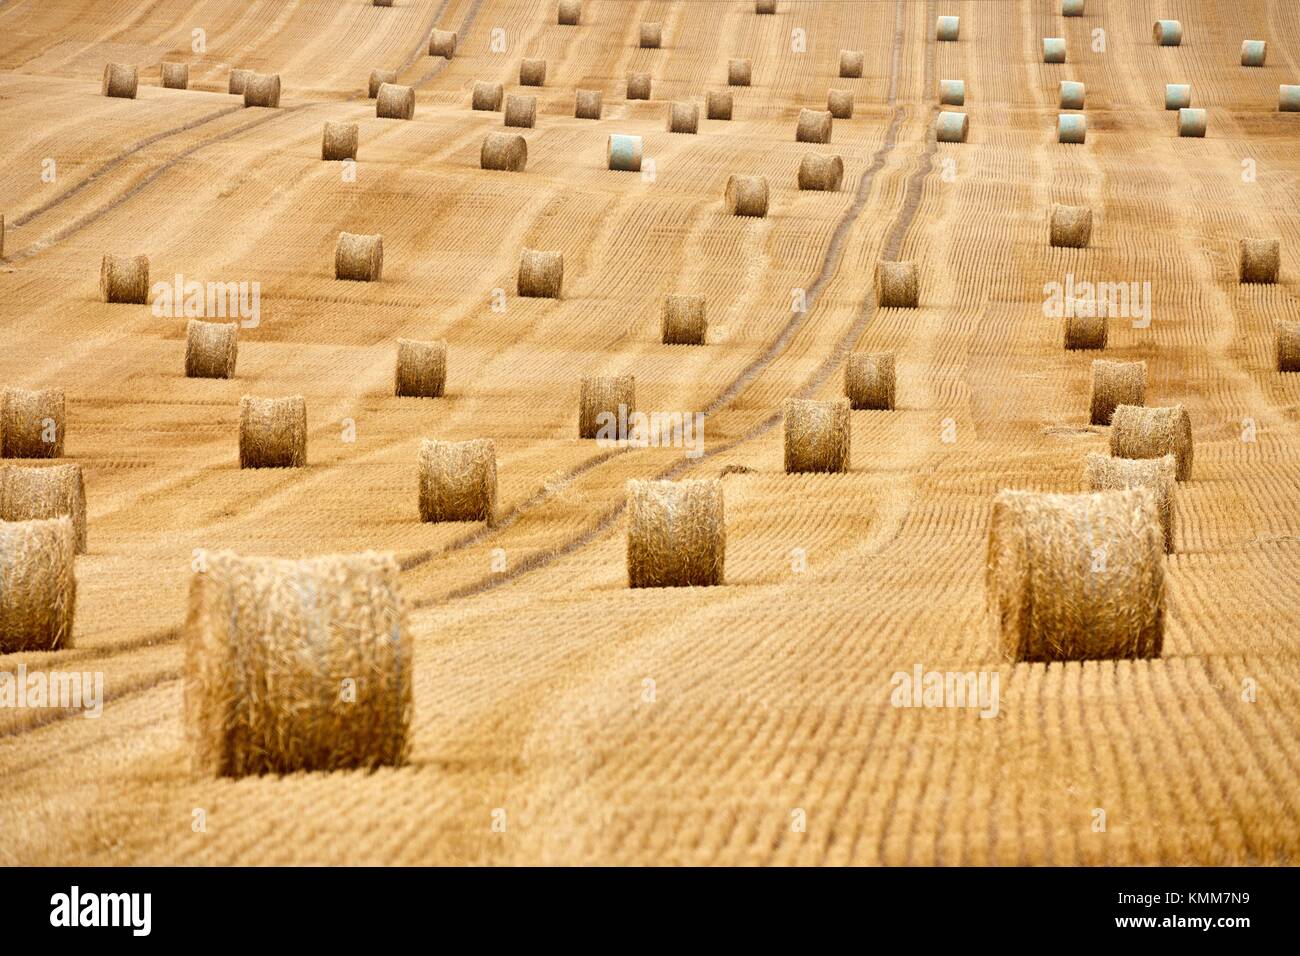 Field of cereal, bales of straw, stubble, near Auxerre, Yonne, Burgundy, Bourgogne, France, Europe Stock Photo